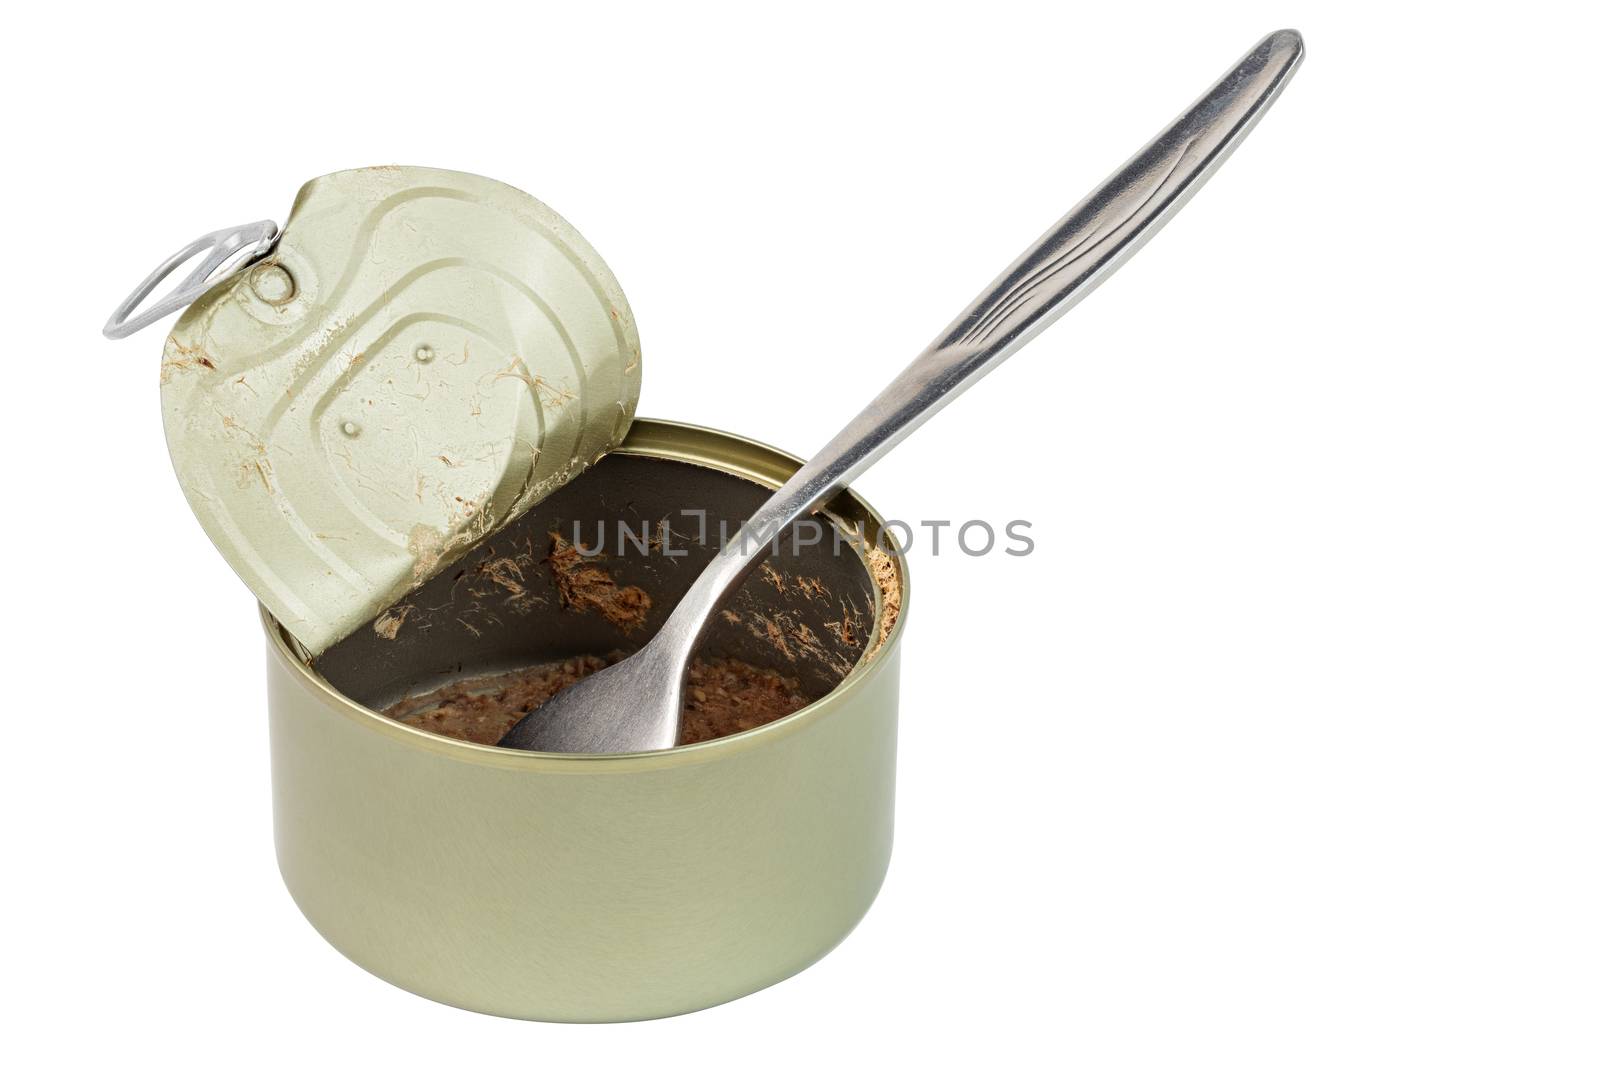 opened and empty tincan with leftovers of tuna and stainless steel fork- isolated on white background with edge-to-edge sharpness